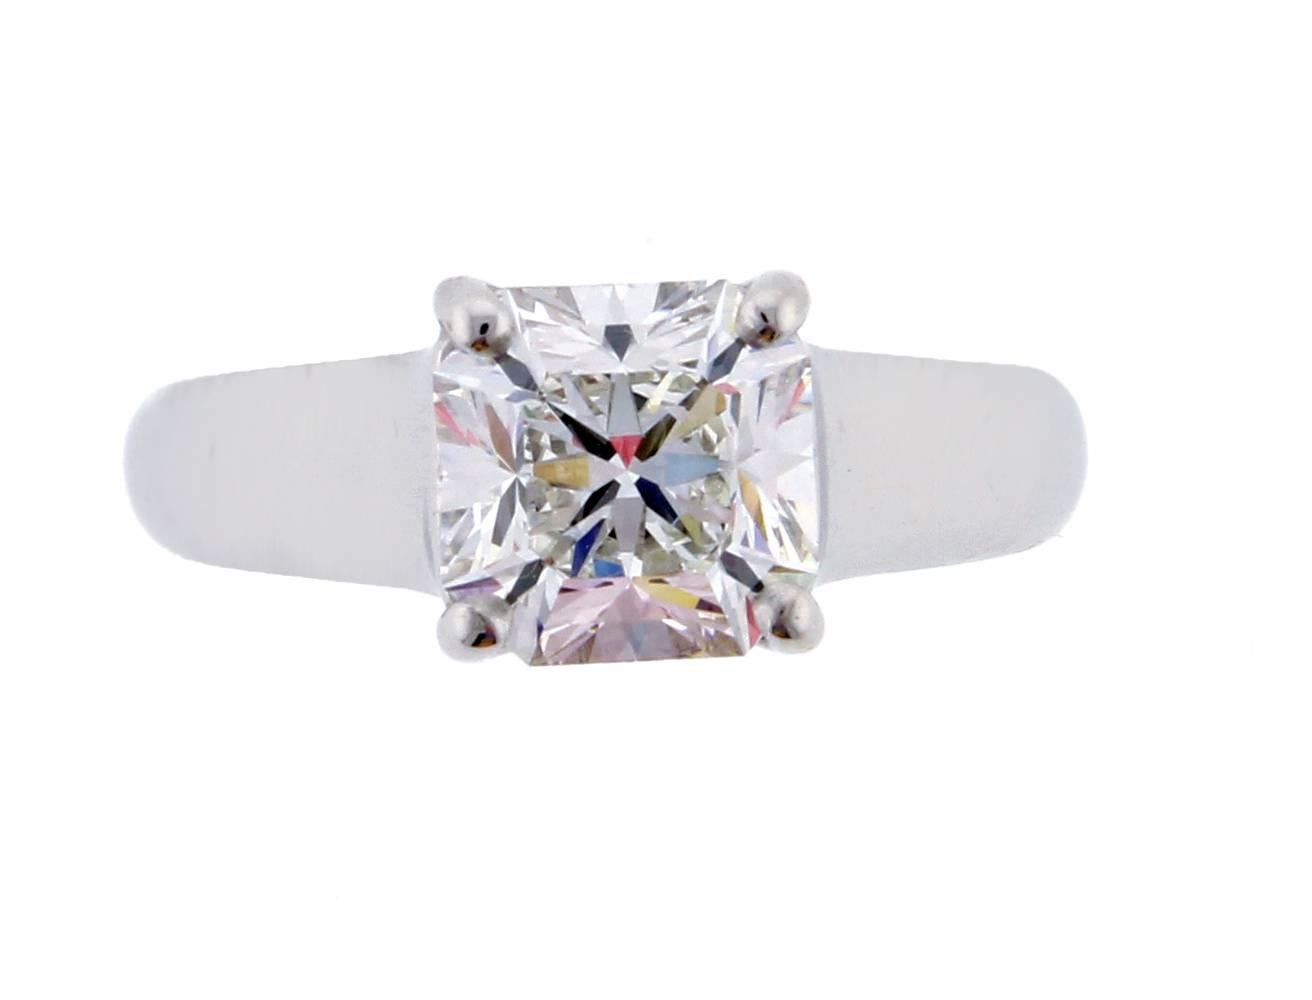 Tiffany’s Lucida® diamond ring with its wide corners and dazzling brilliance makes a stunning presentation. The diamond 1.90 carat mixed cut corner square diamond is G  color and VS1 clarity. Set in platinum, polished like new. Size 5 .75 adjustable